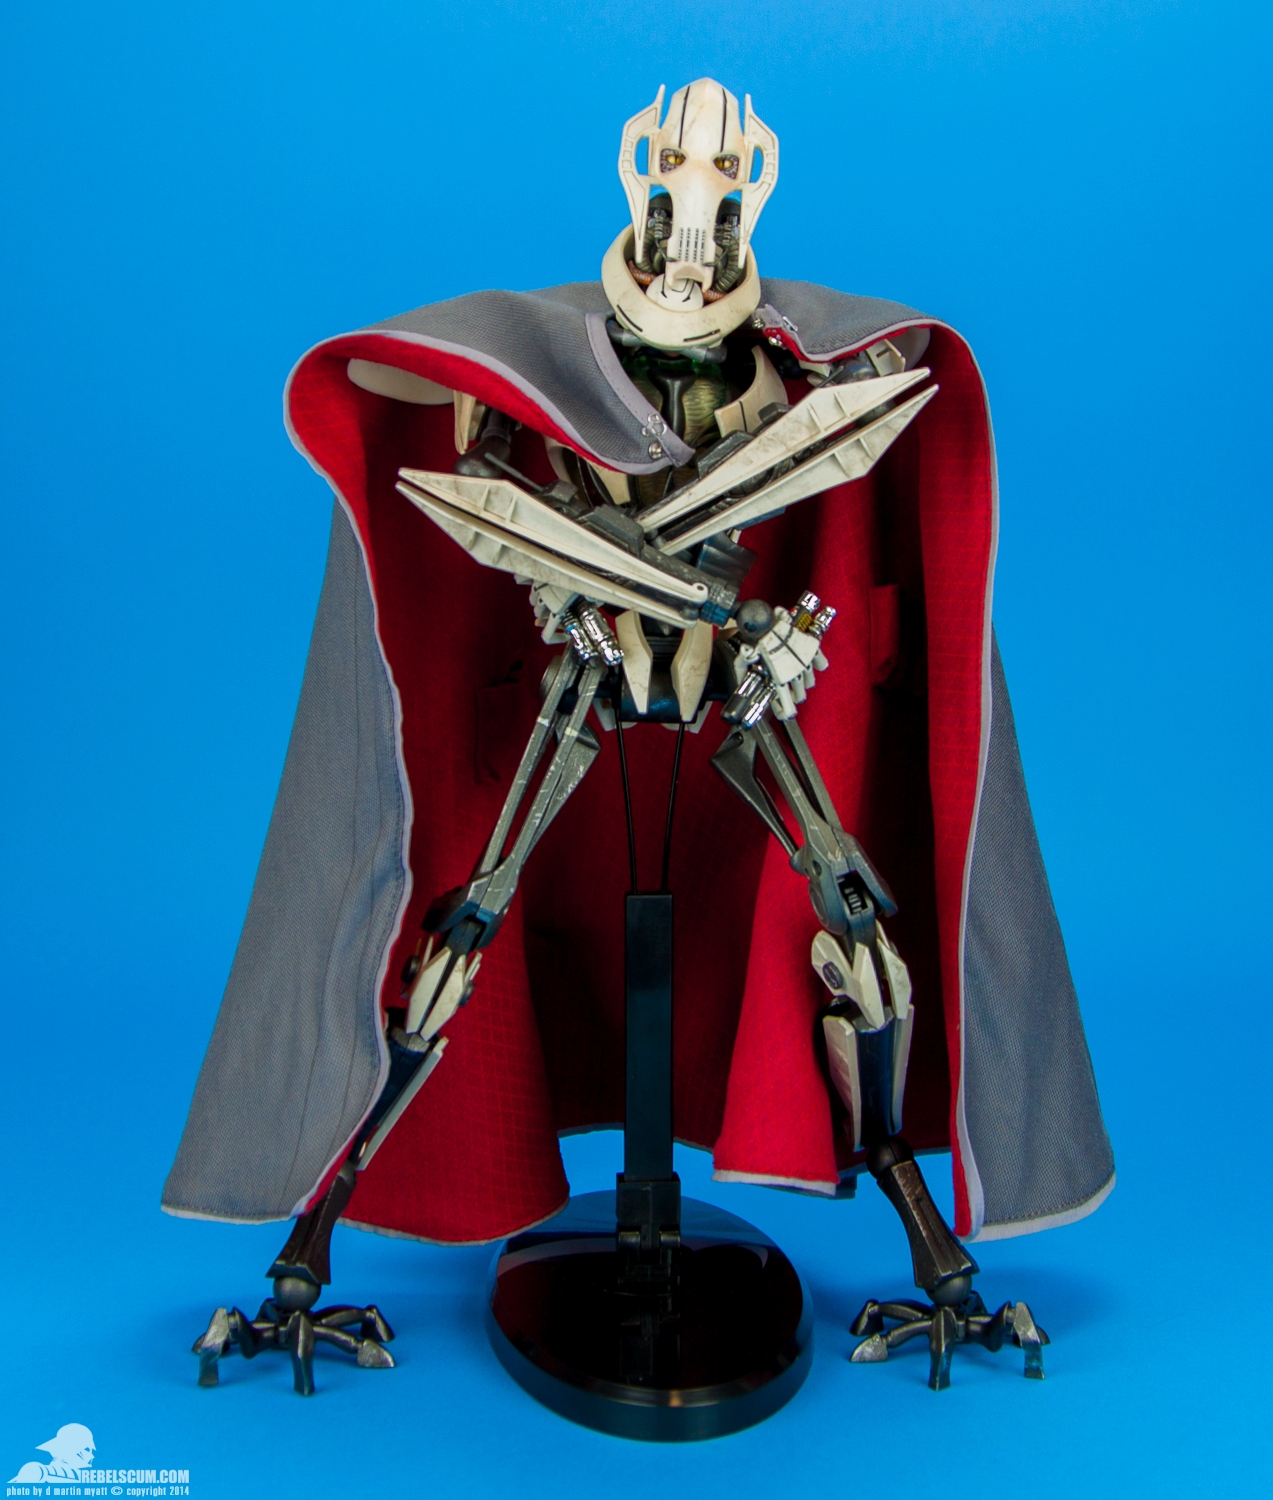 General-Grievous-Sixth-Scale-Figure-Sideshow-Collectibles-030.jpg